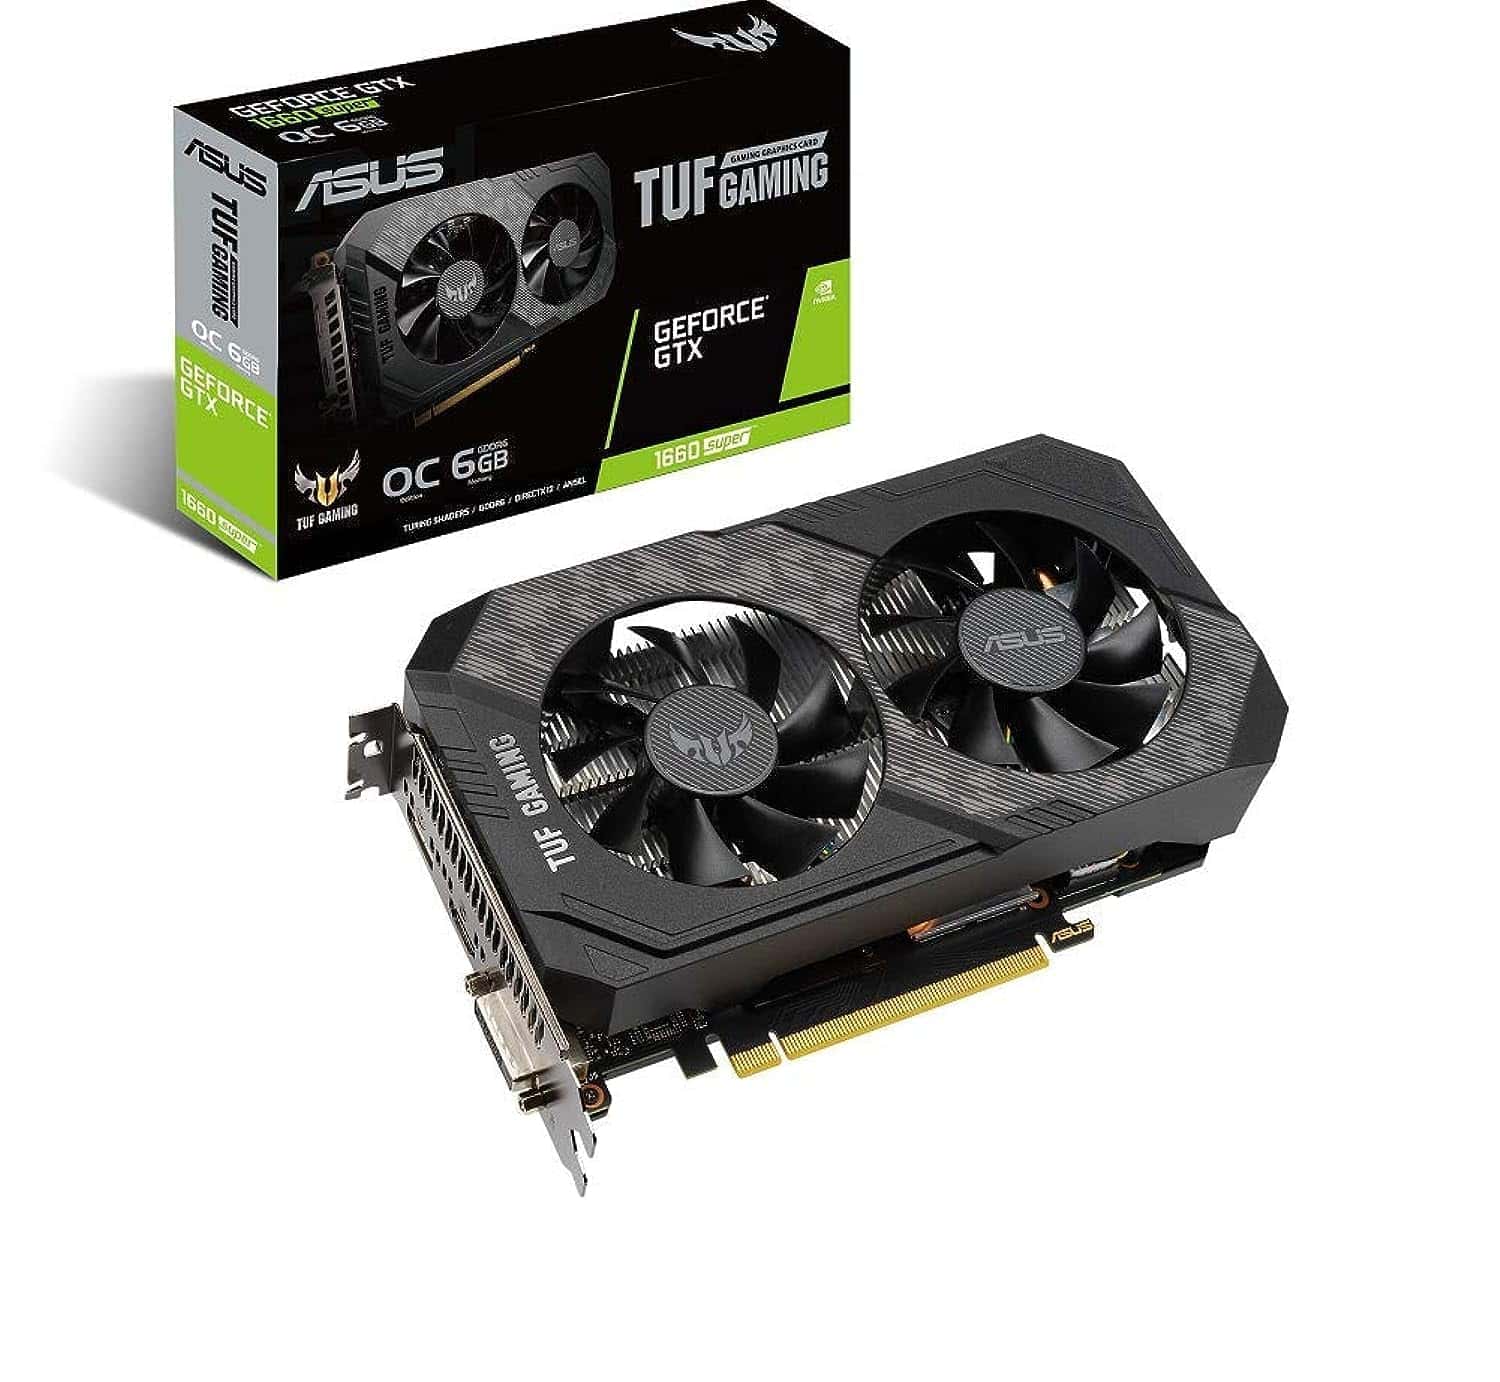 ASUS Tuf Gaming Nvidia Geforce GTX 1660 Super Oc Edition Gaming Graphics Card (Pcie 3.0,6Gb Gddr6 Memory,Hdmi,Displayport,Dvi-D,Fhd Gaming,Ip5X Dust Resistance,Space-Grade Lubricant),pci_e_x16